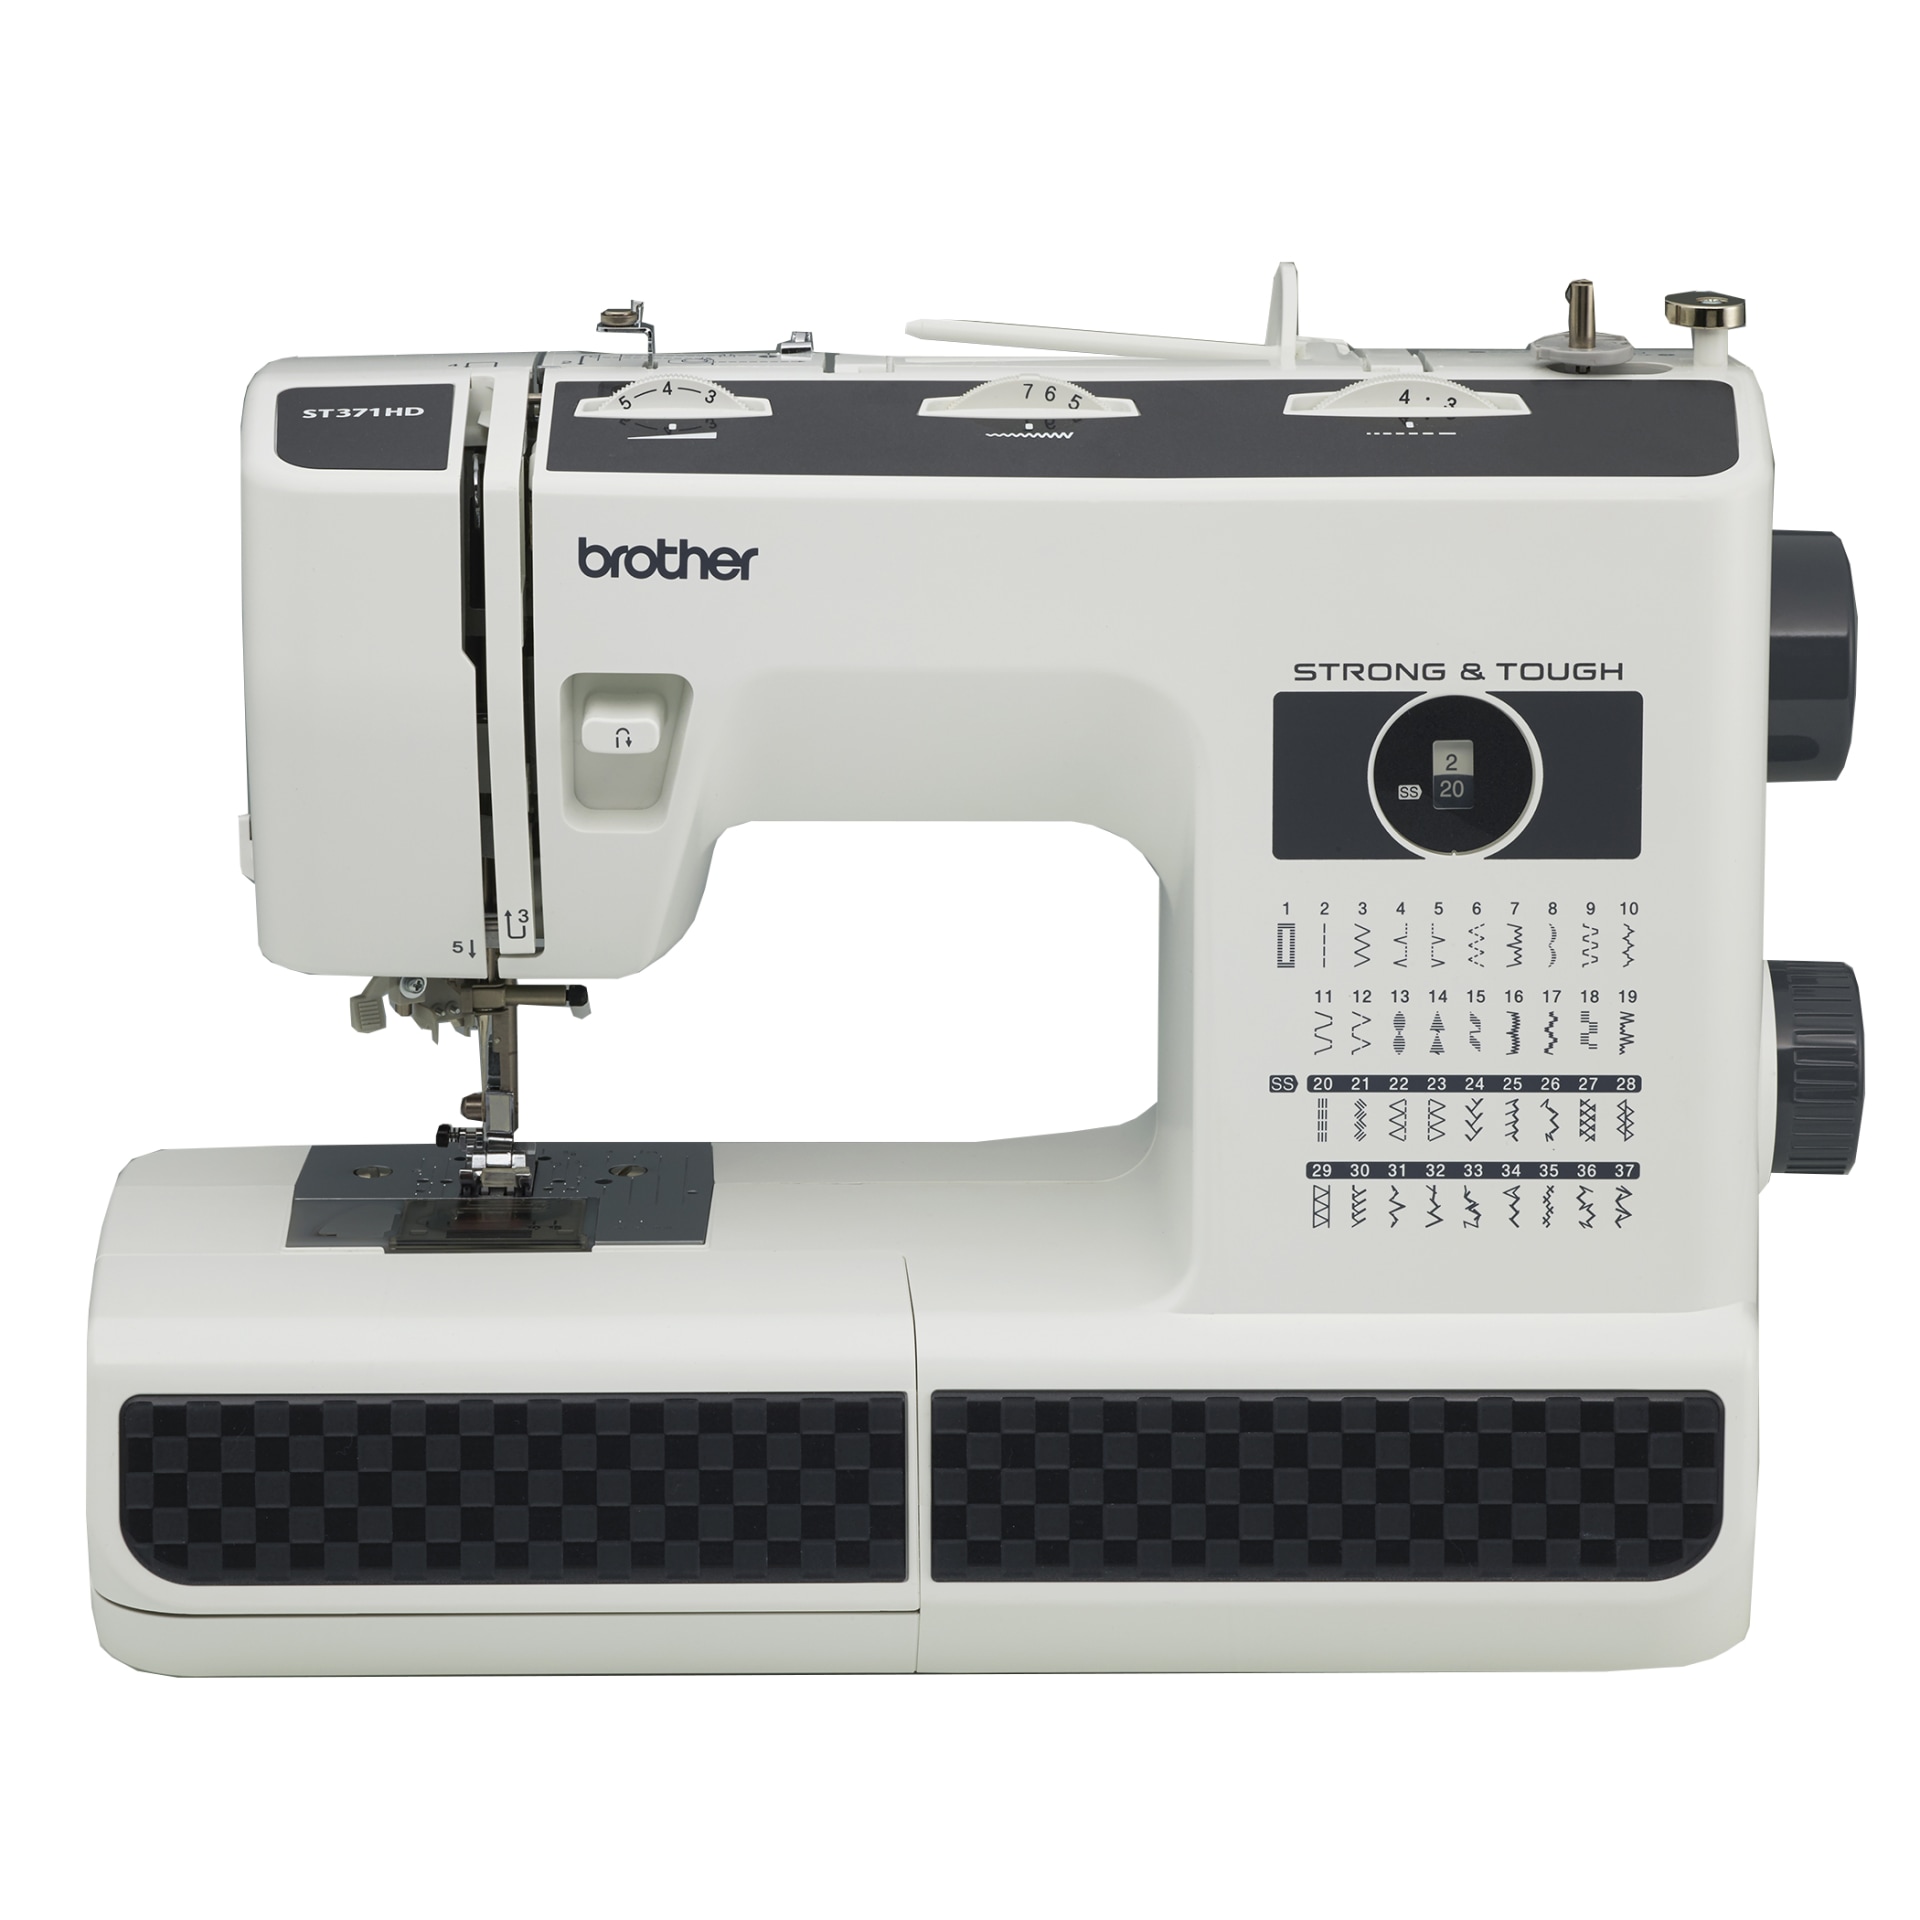 5 of the Best Affordable Sewing Machines for Beginners - Travel